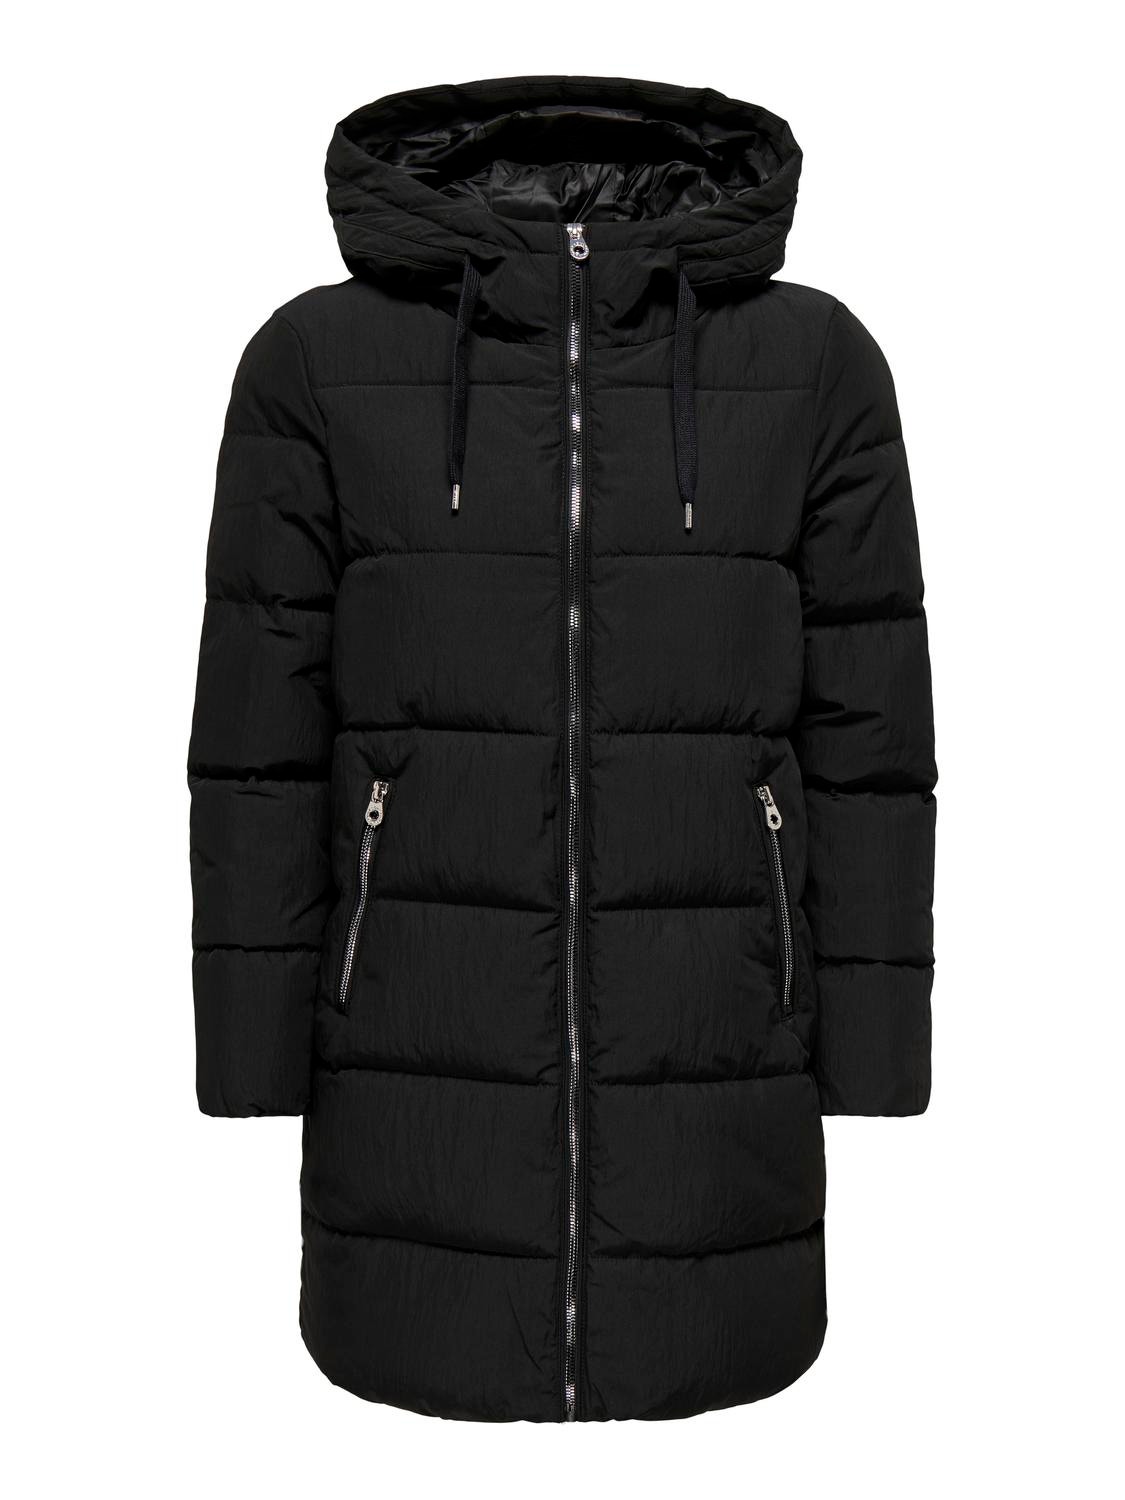 ONLY Long Puffer Jacket -Black - 15217487